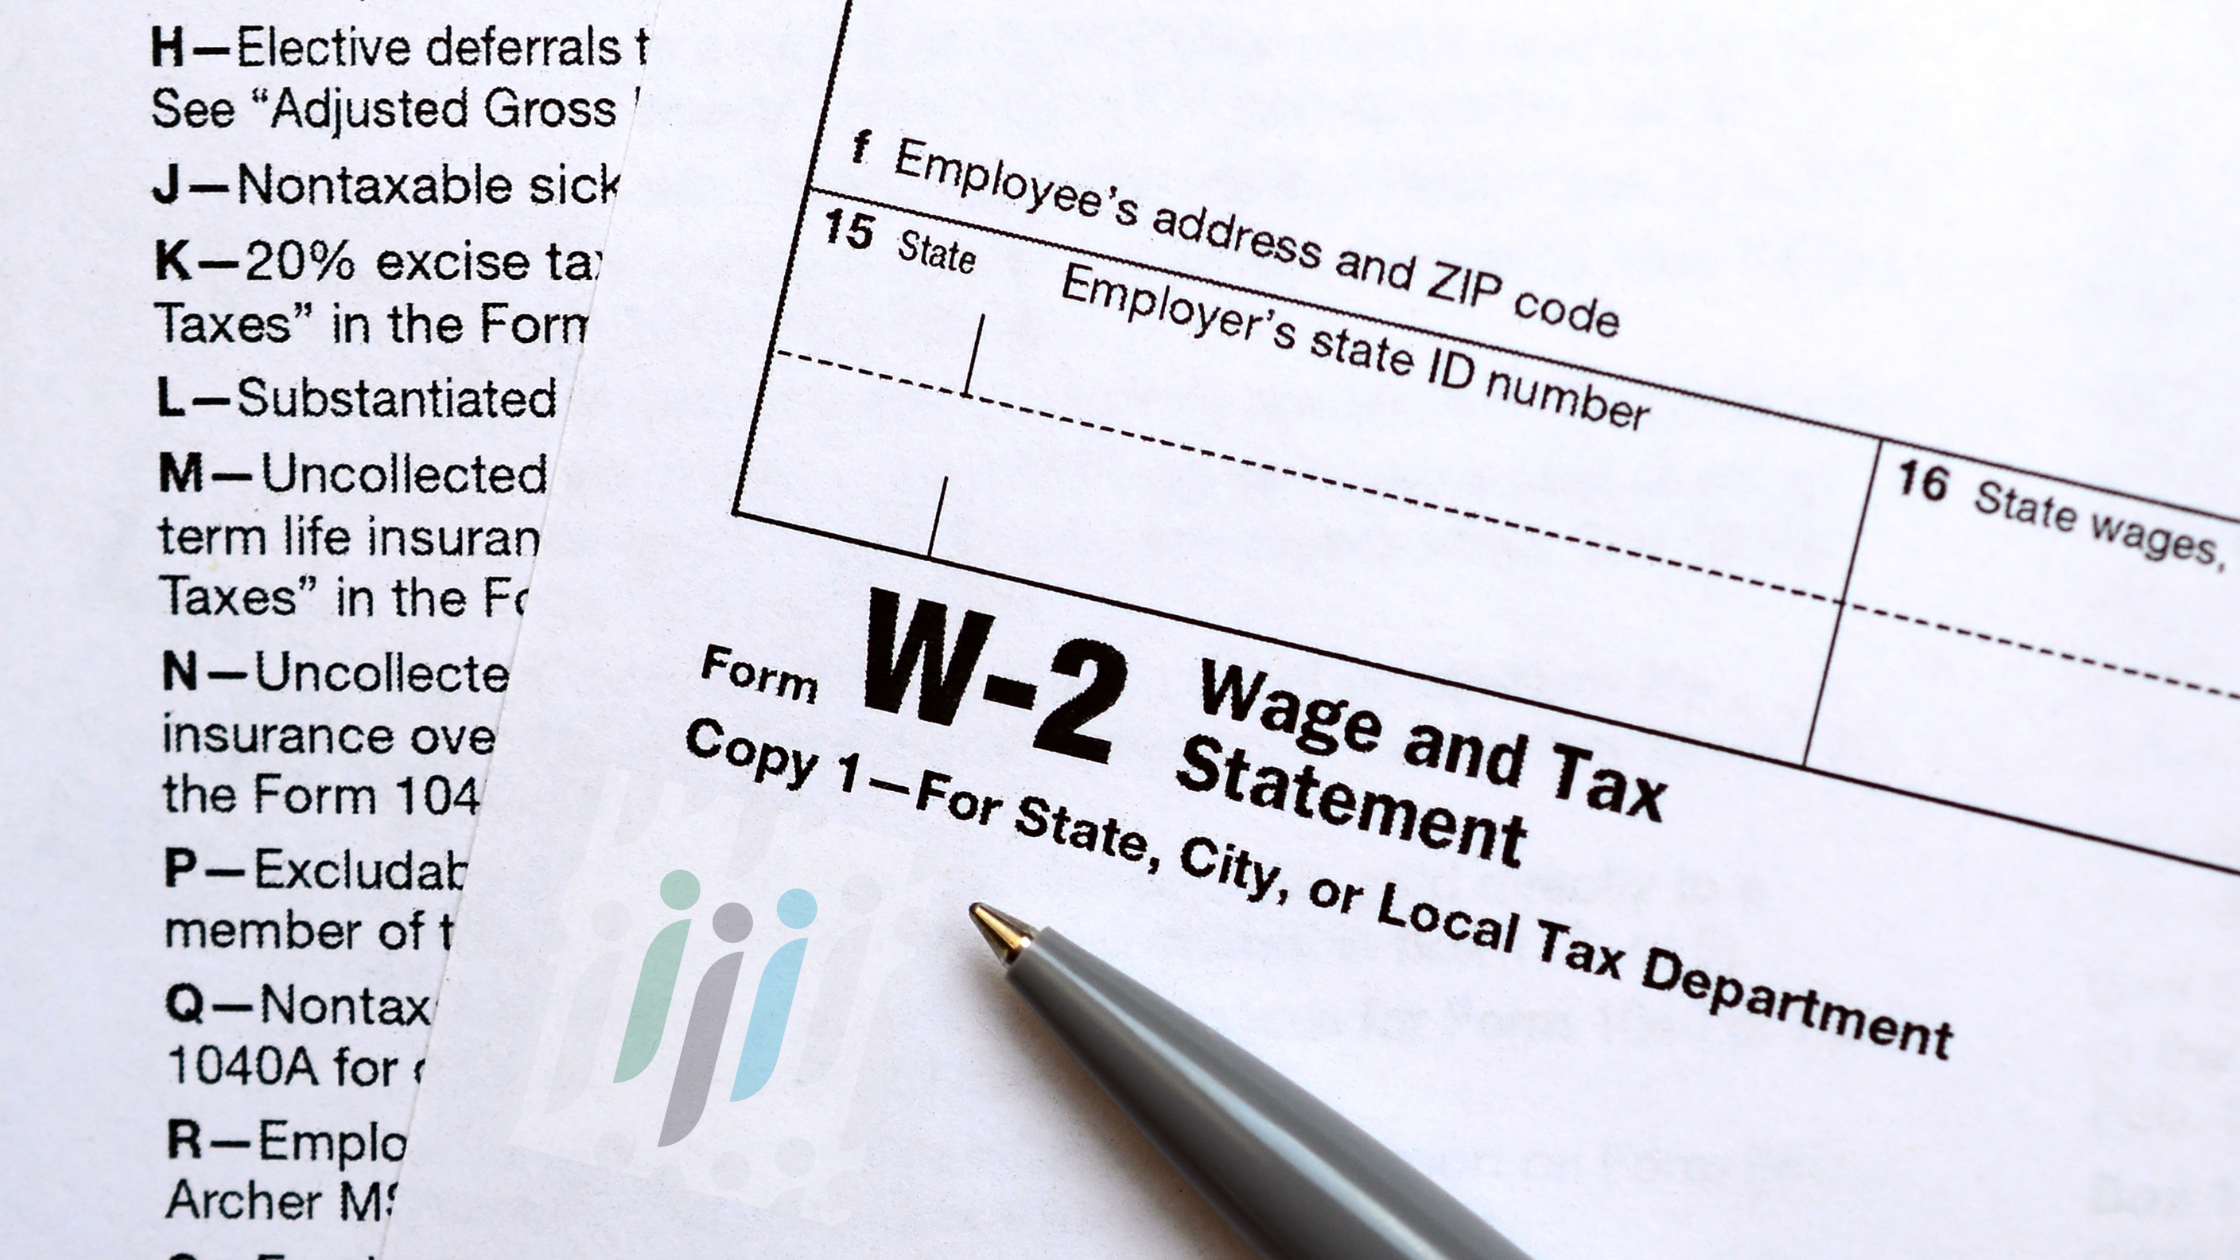 Image of a W-2 form and a pen sitting on top of it an Eastern Staffing & Recruiting watermark is in the lower left corner